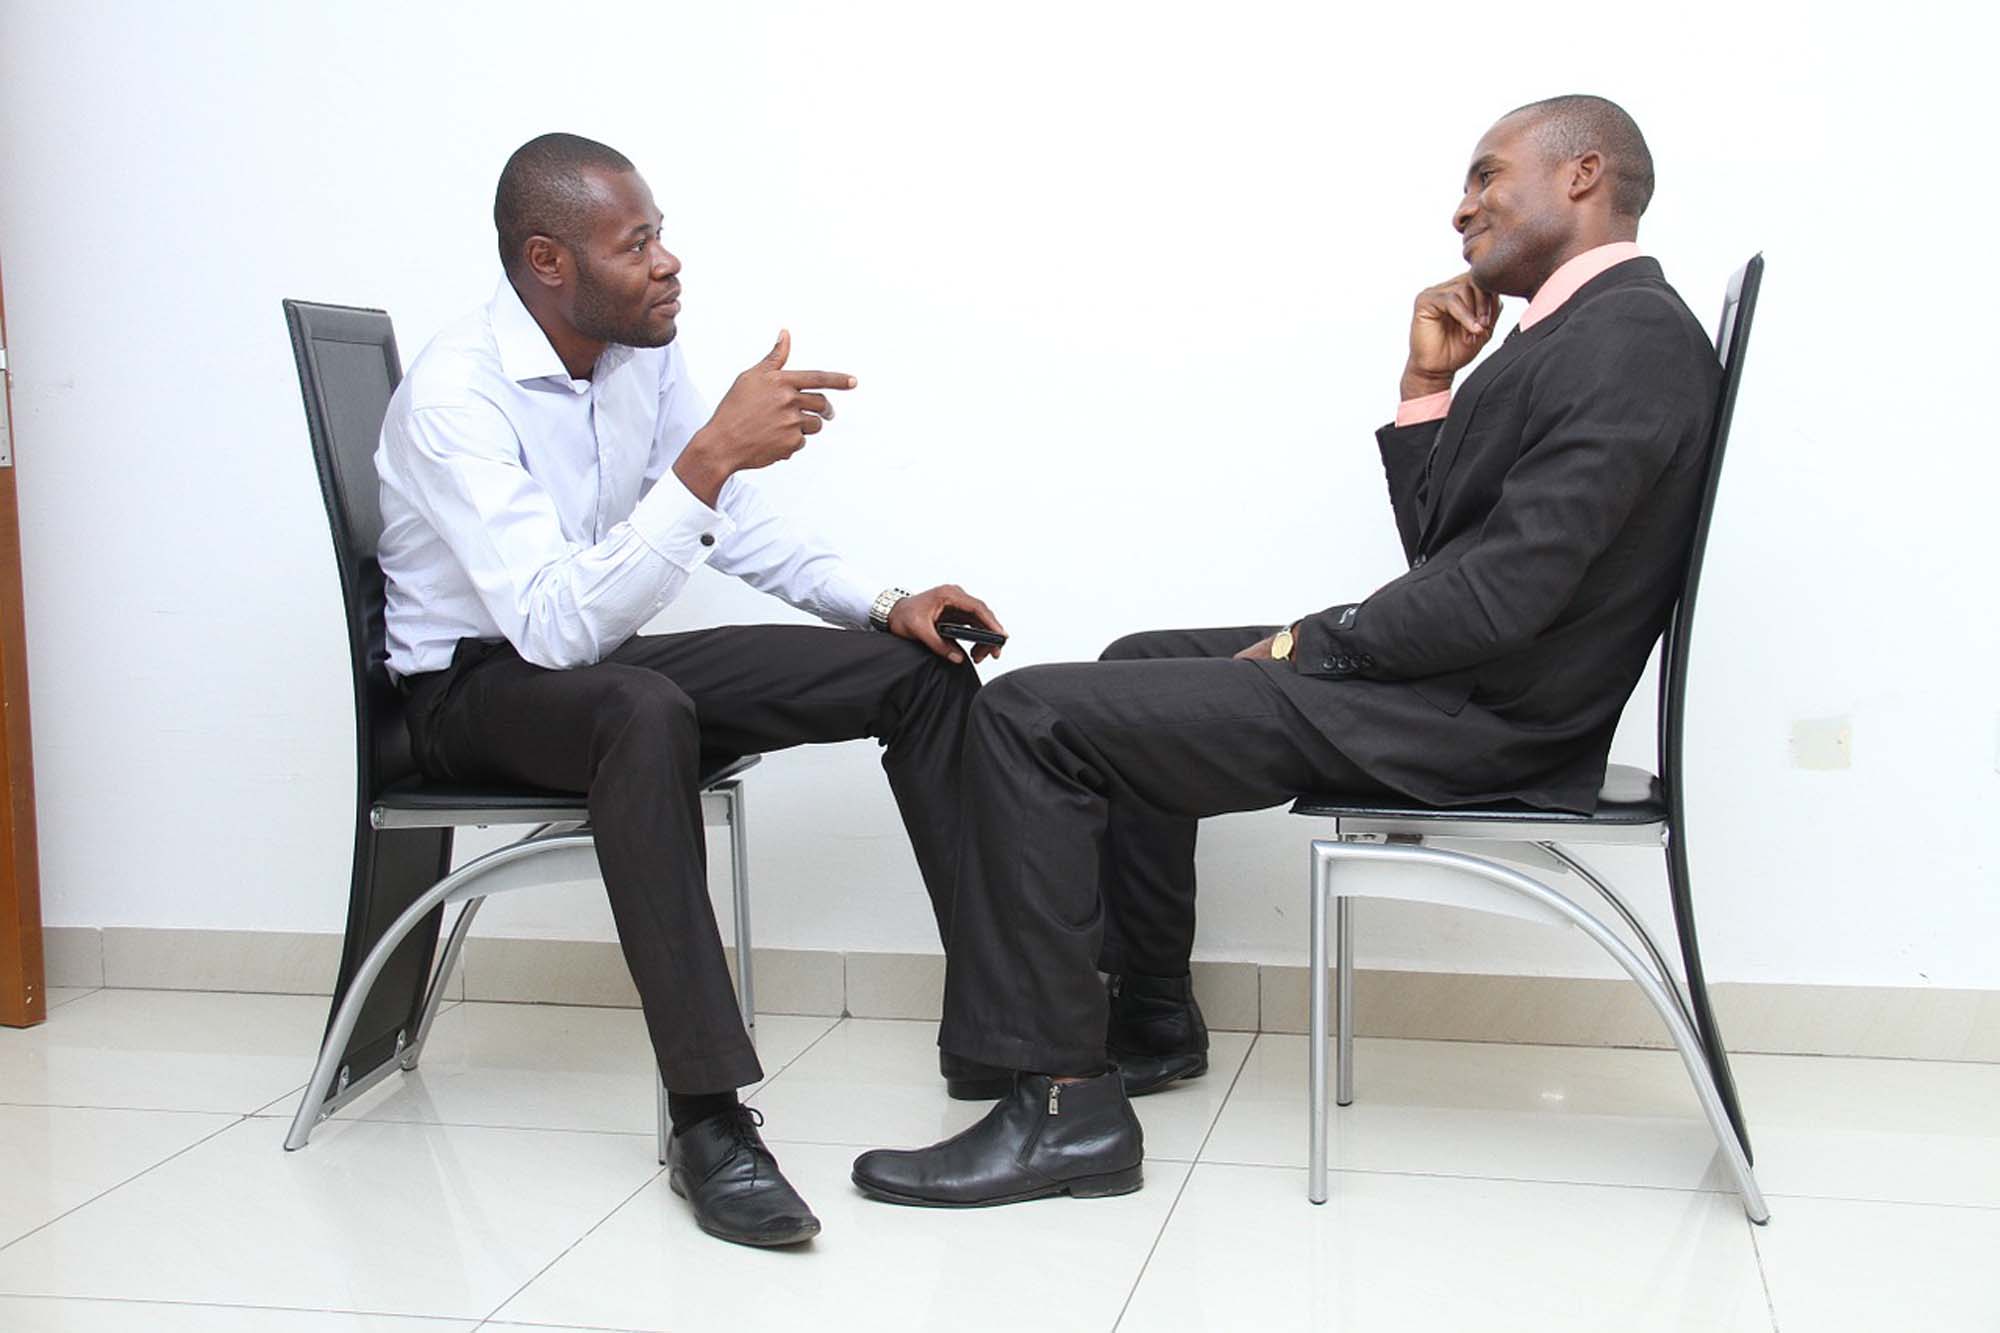 job interview questions employers should avoid